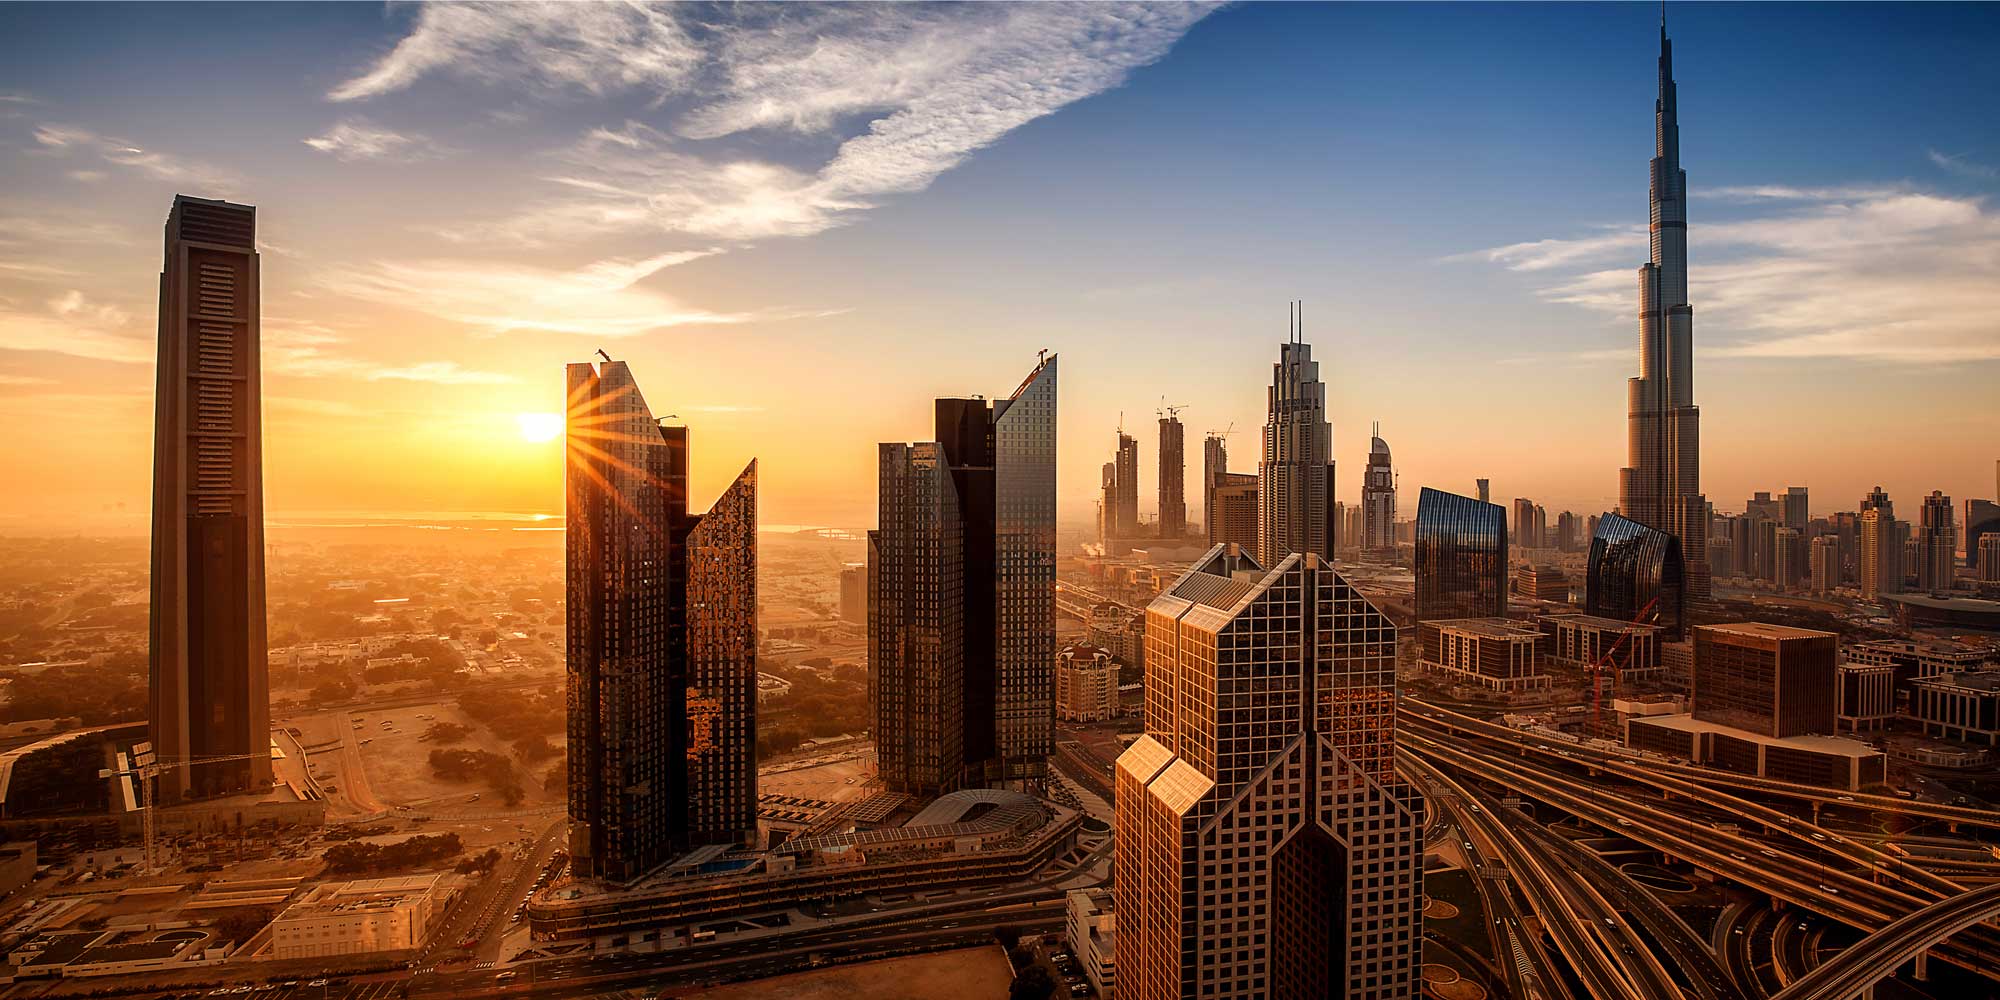 Dubai and other members of the UAE are an exciting market. (Photo internet reproduction)